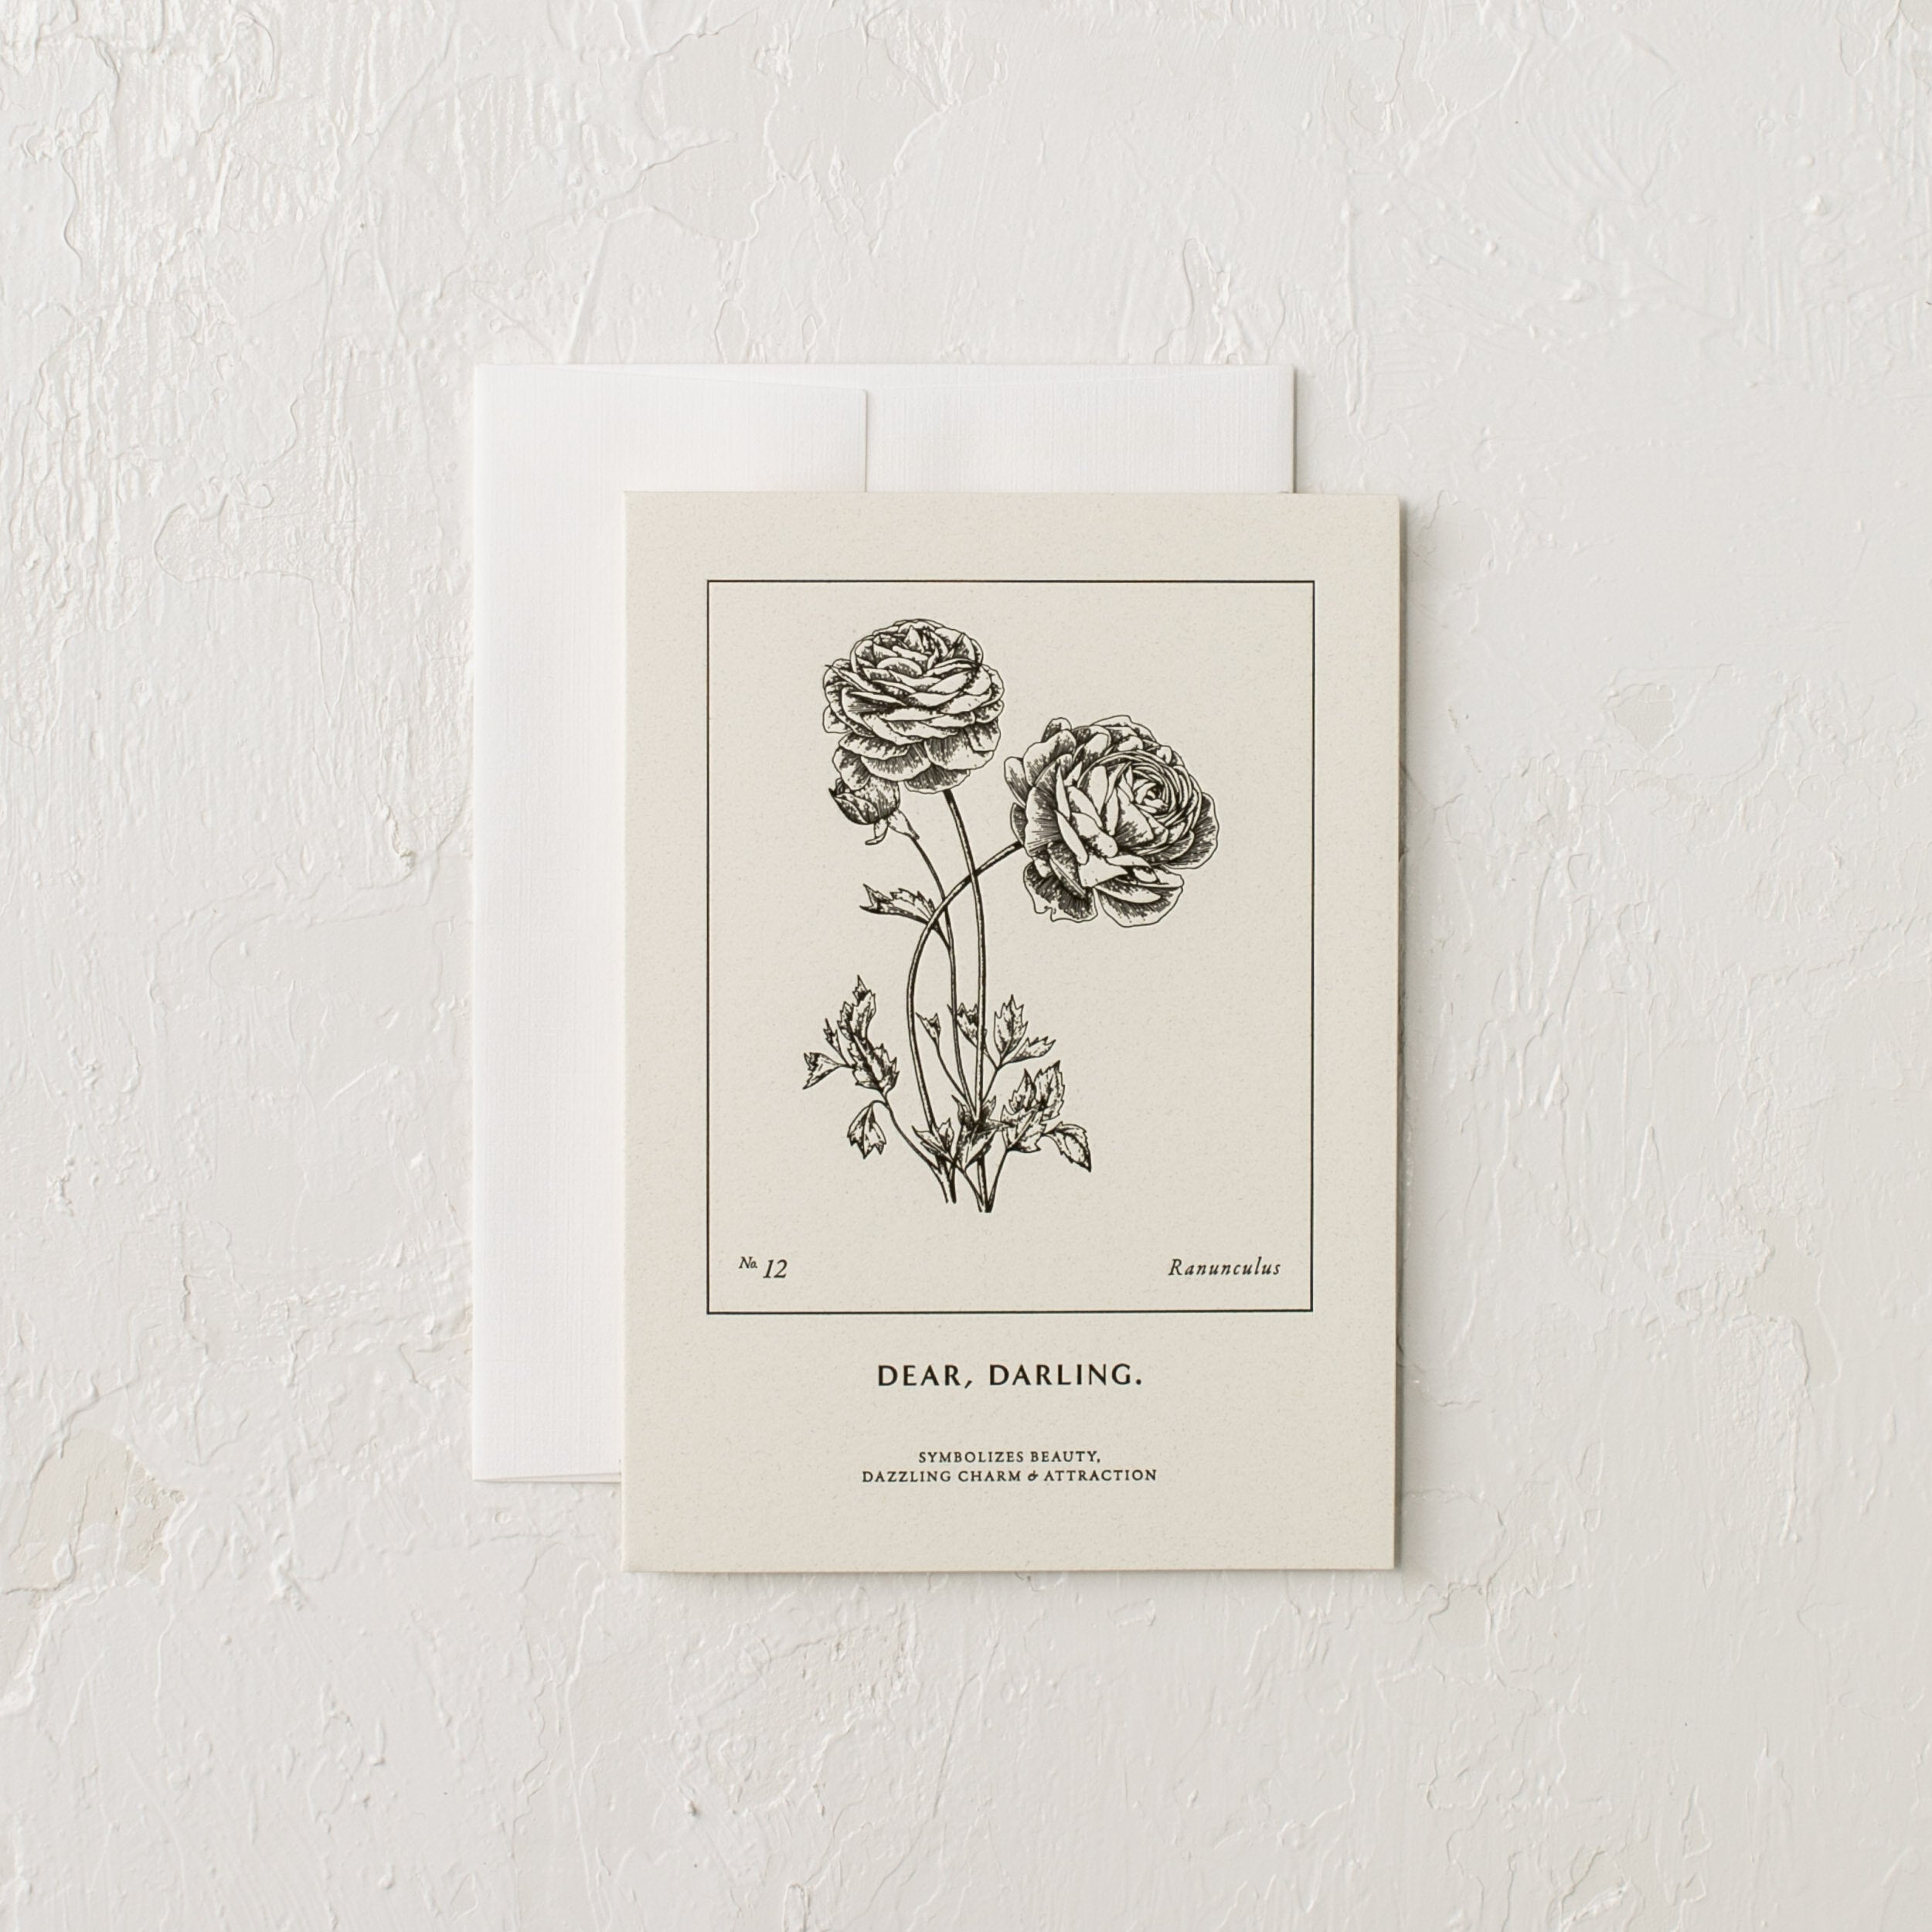 Letter-pressed botanical greeting card. Letter pressed illustration of a Ranunculus. "Dear, Darling." - "Symbolizes Beauty, Dazzling Charm and Attraction" Shop Verdant Kansas City.  